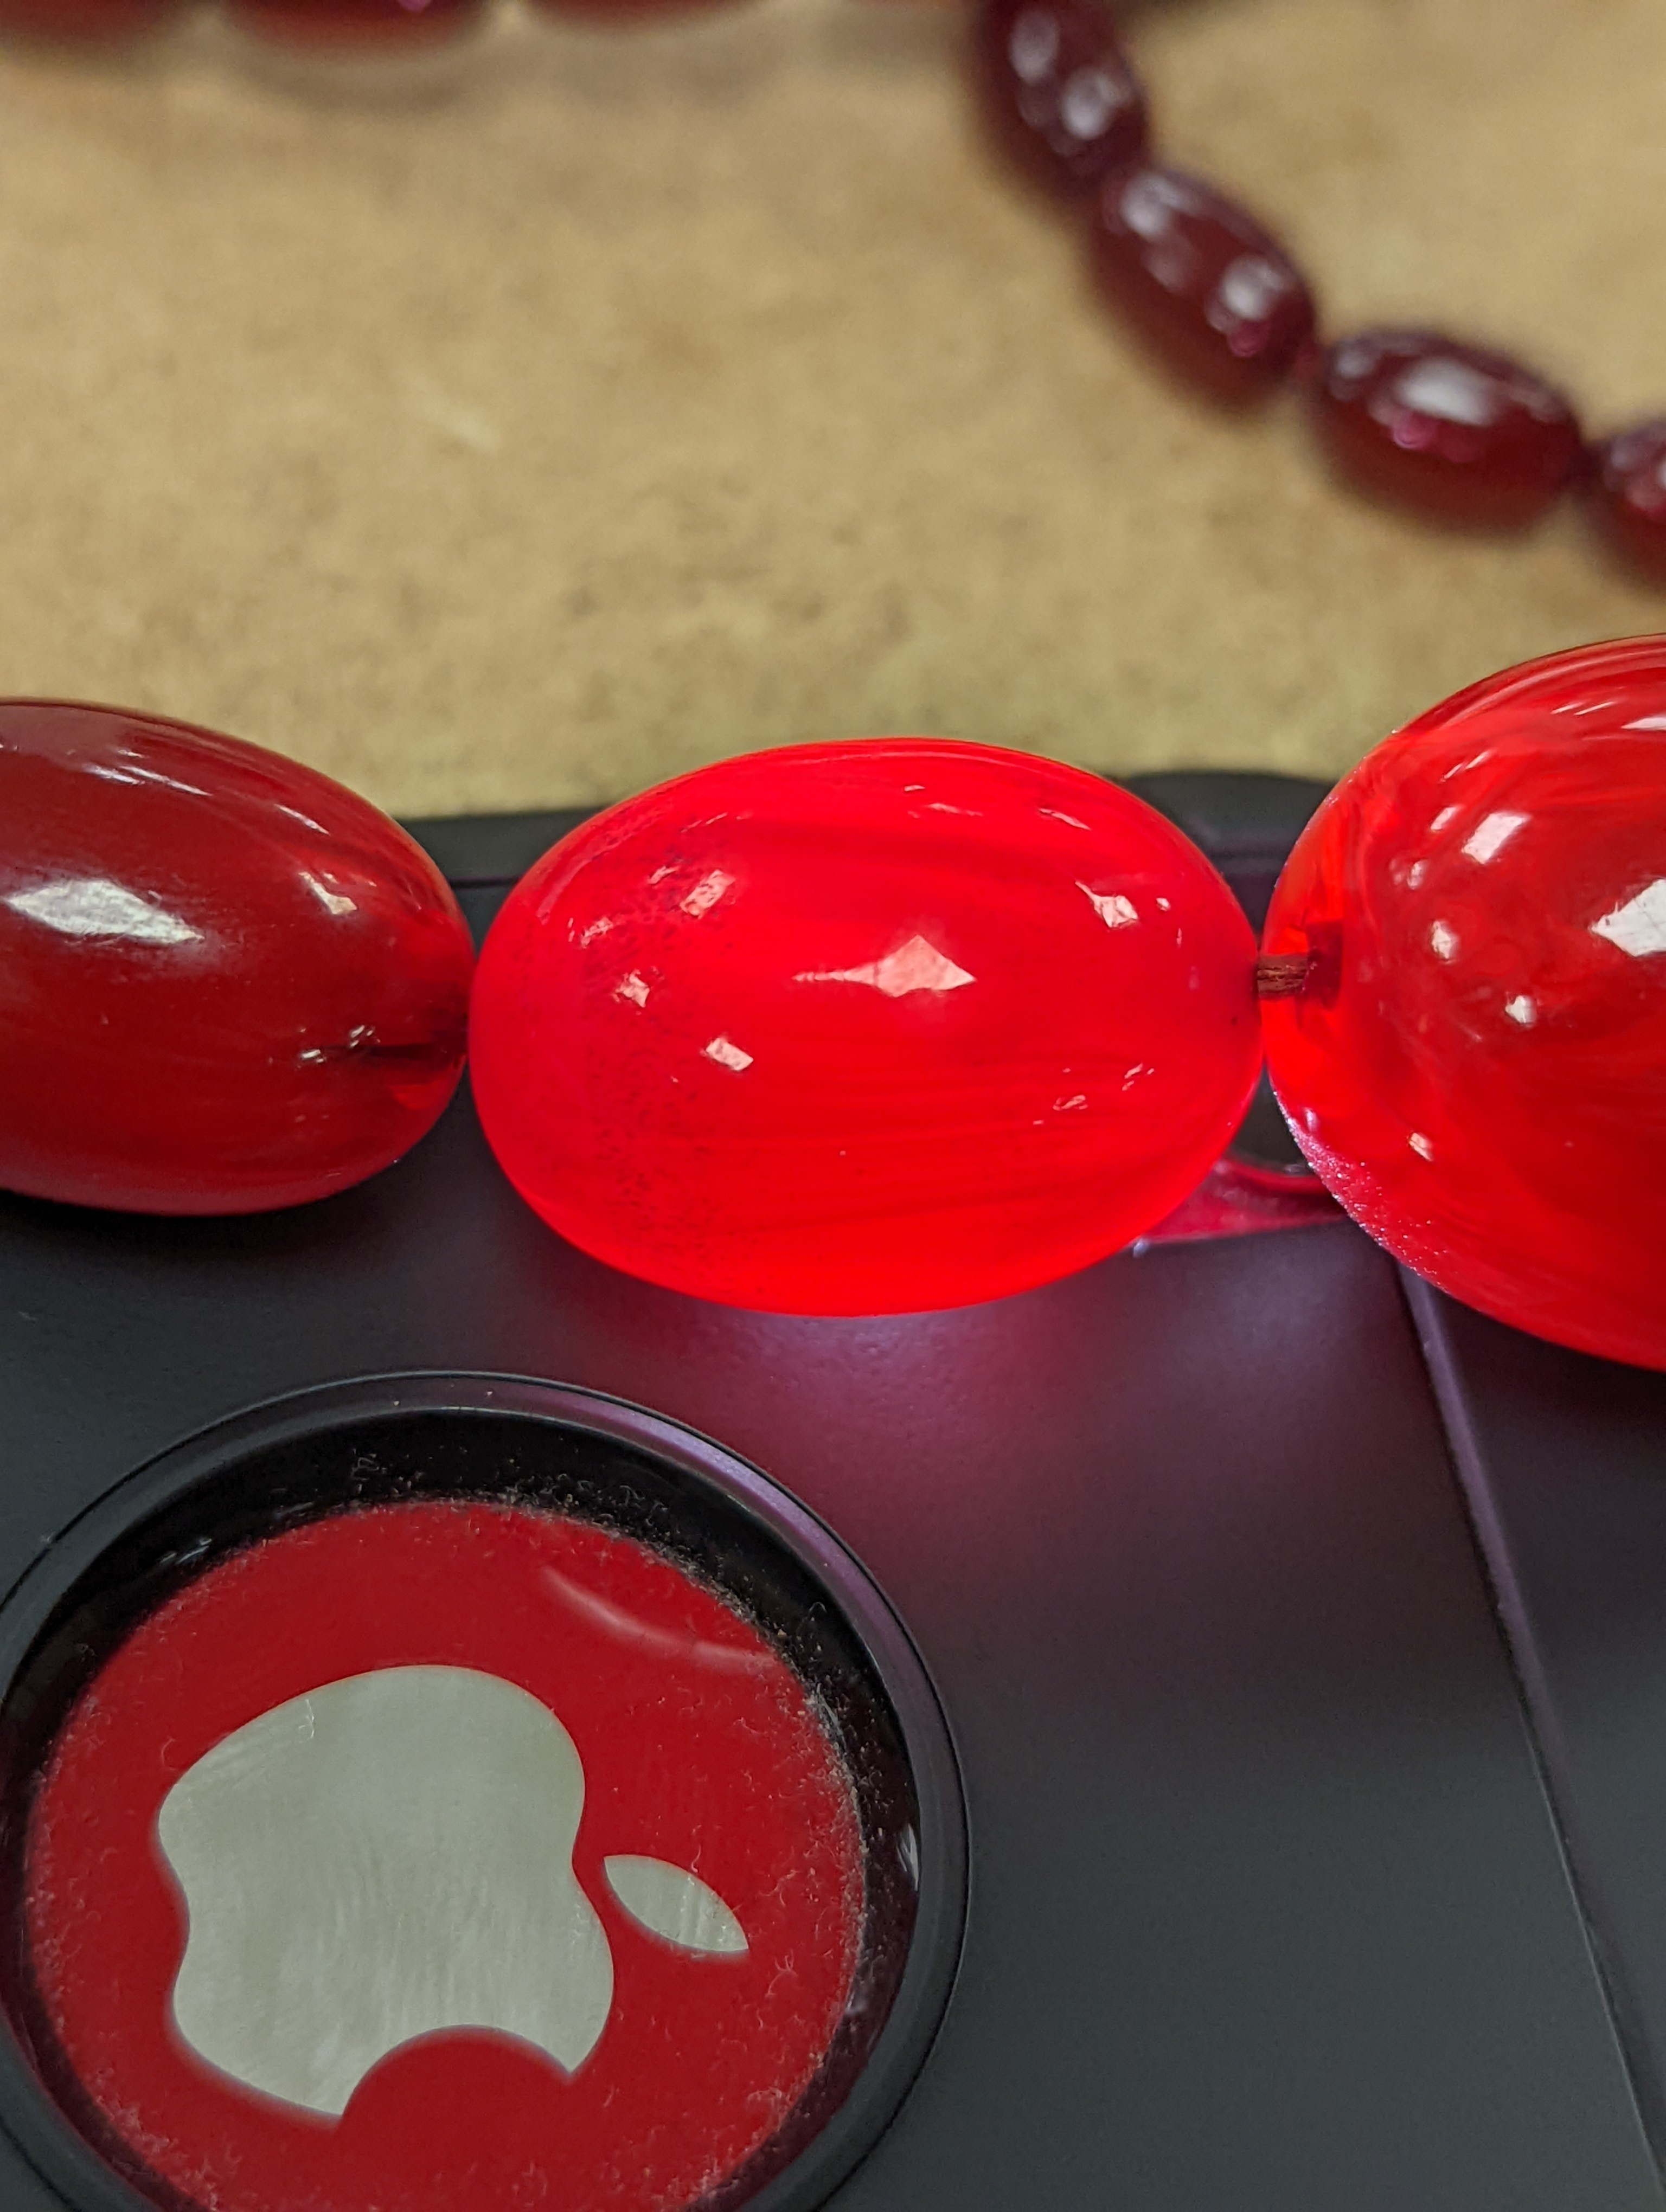 A single strand graduated simulated cherry amber bead necklece, 72cm, gross weight 63 grams.